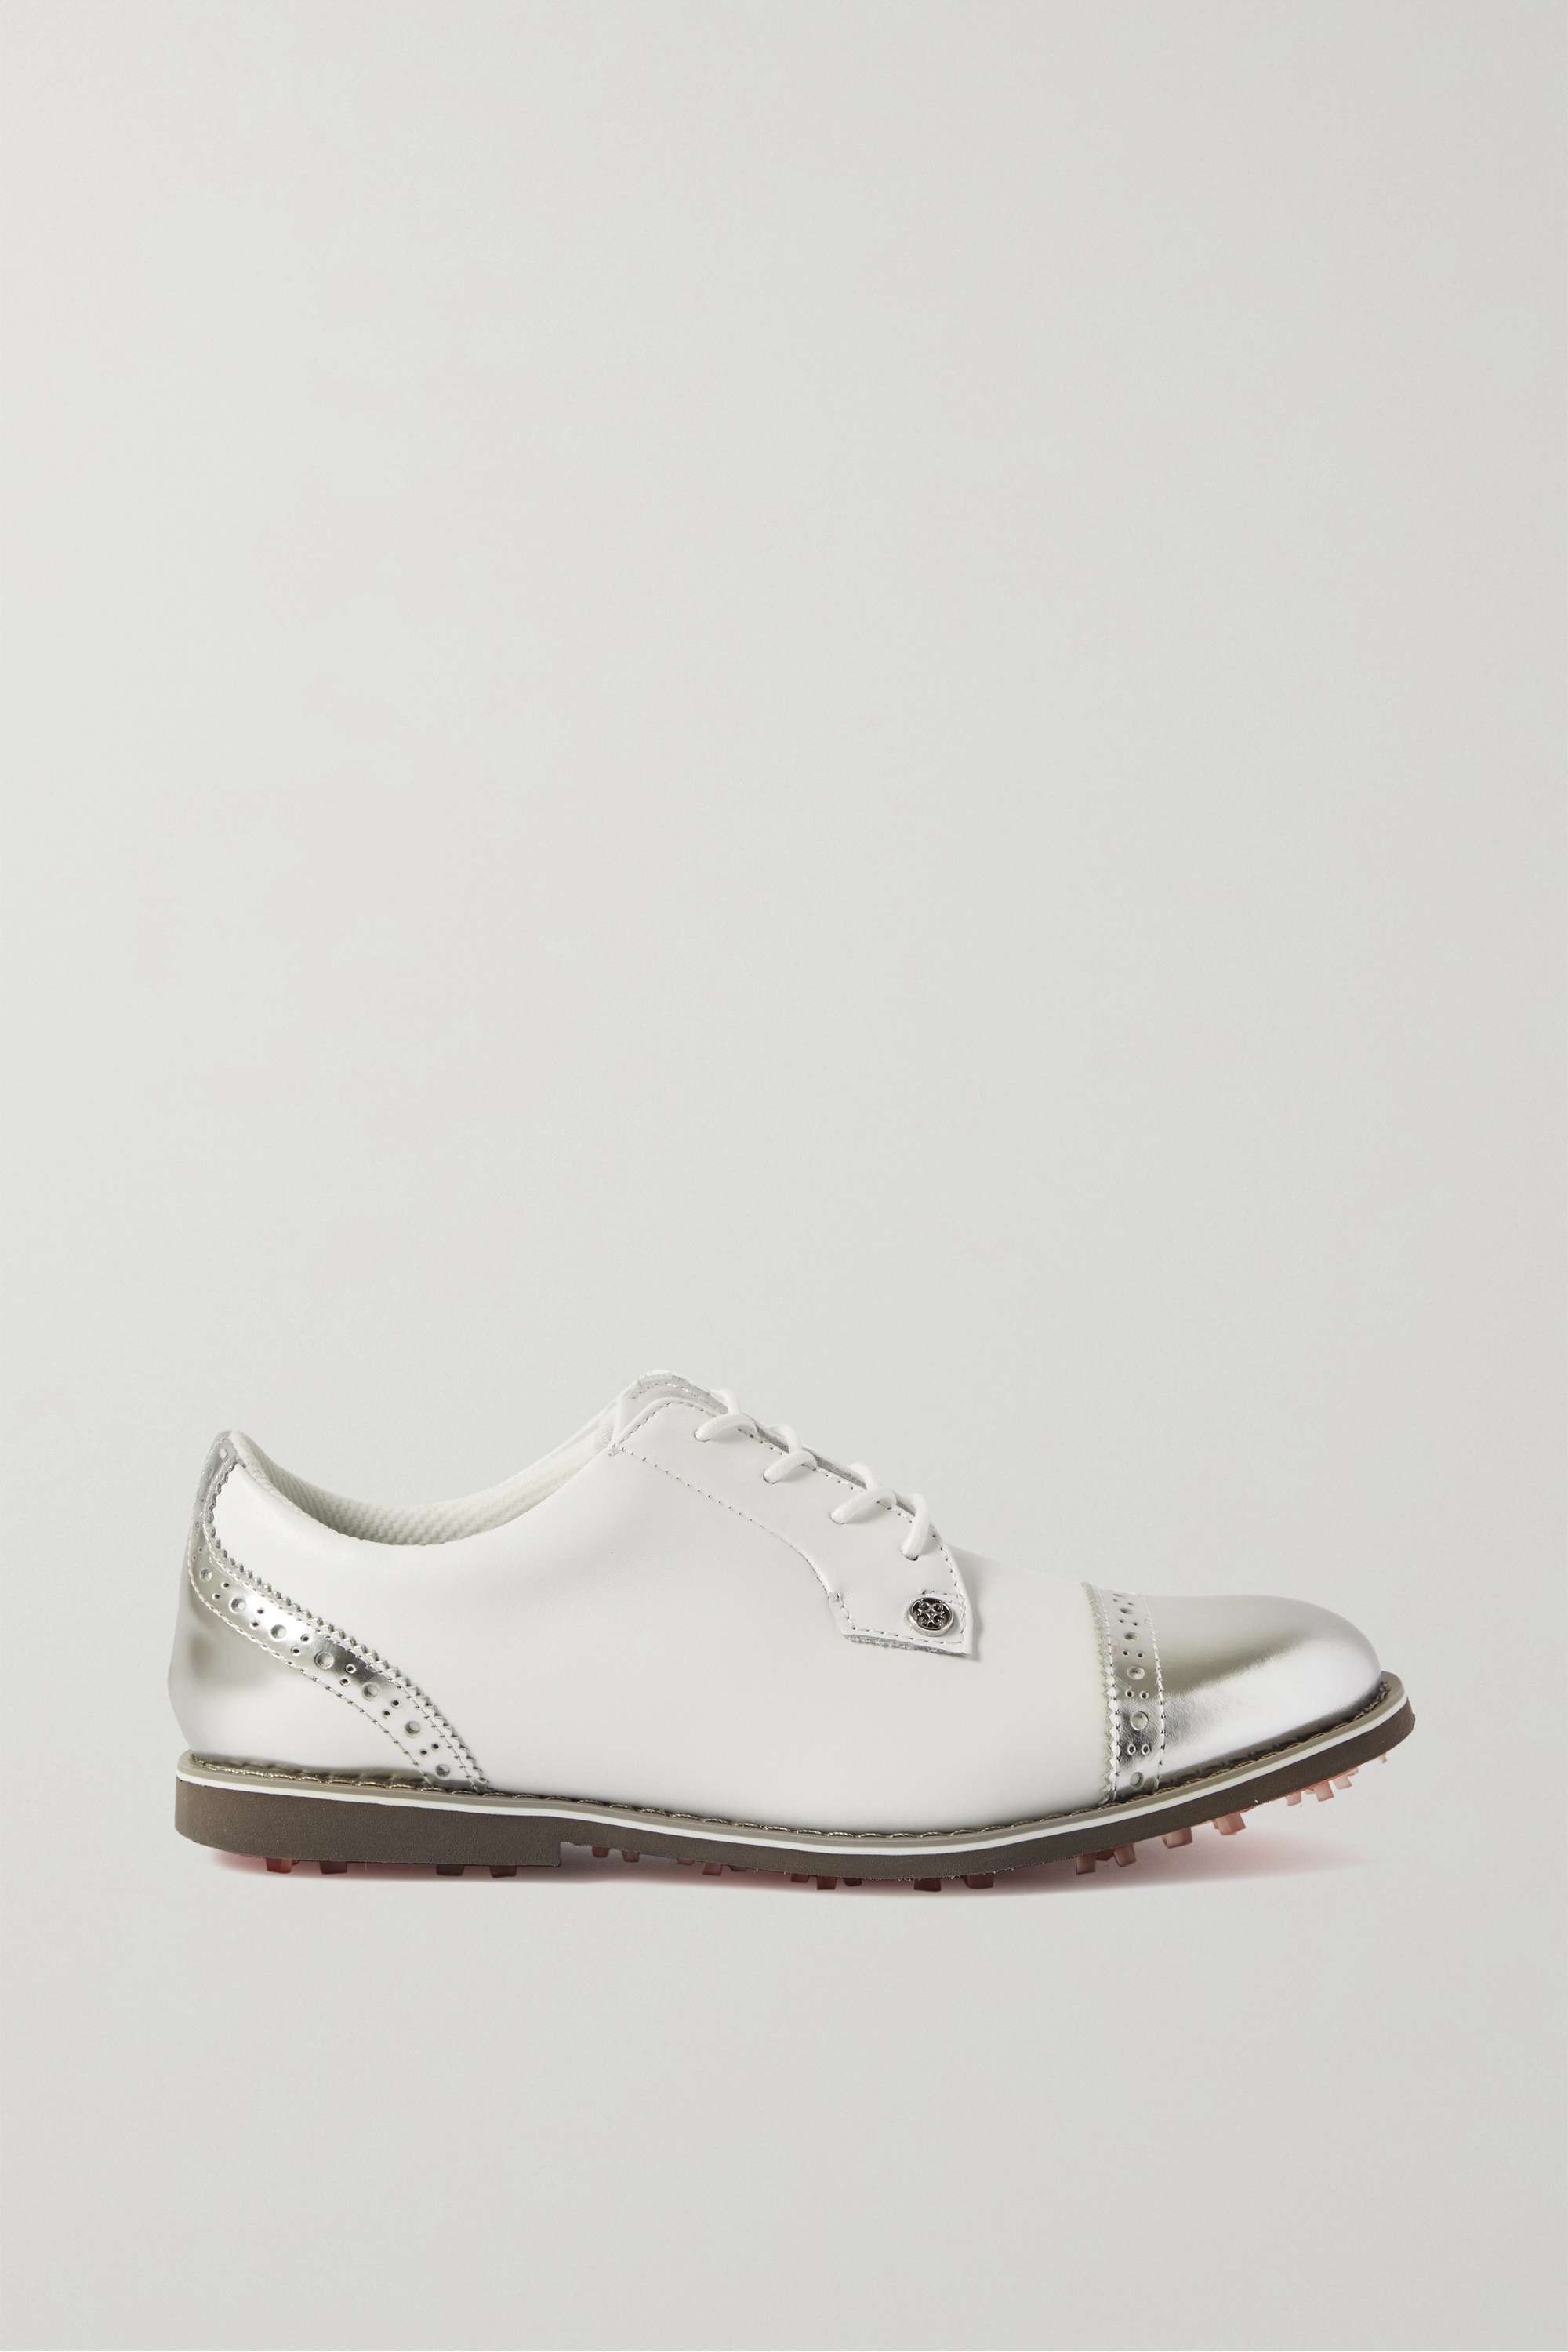 G/FORE + Gallivanter two-tone metallic leather golf shoes